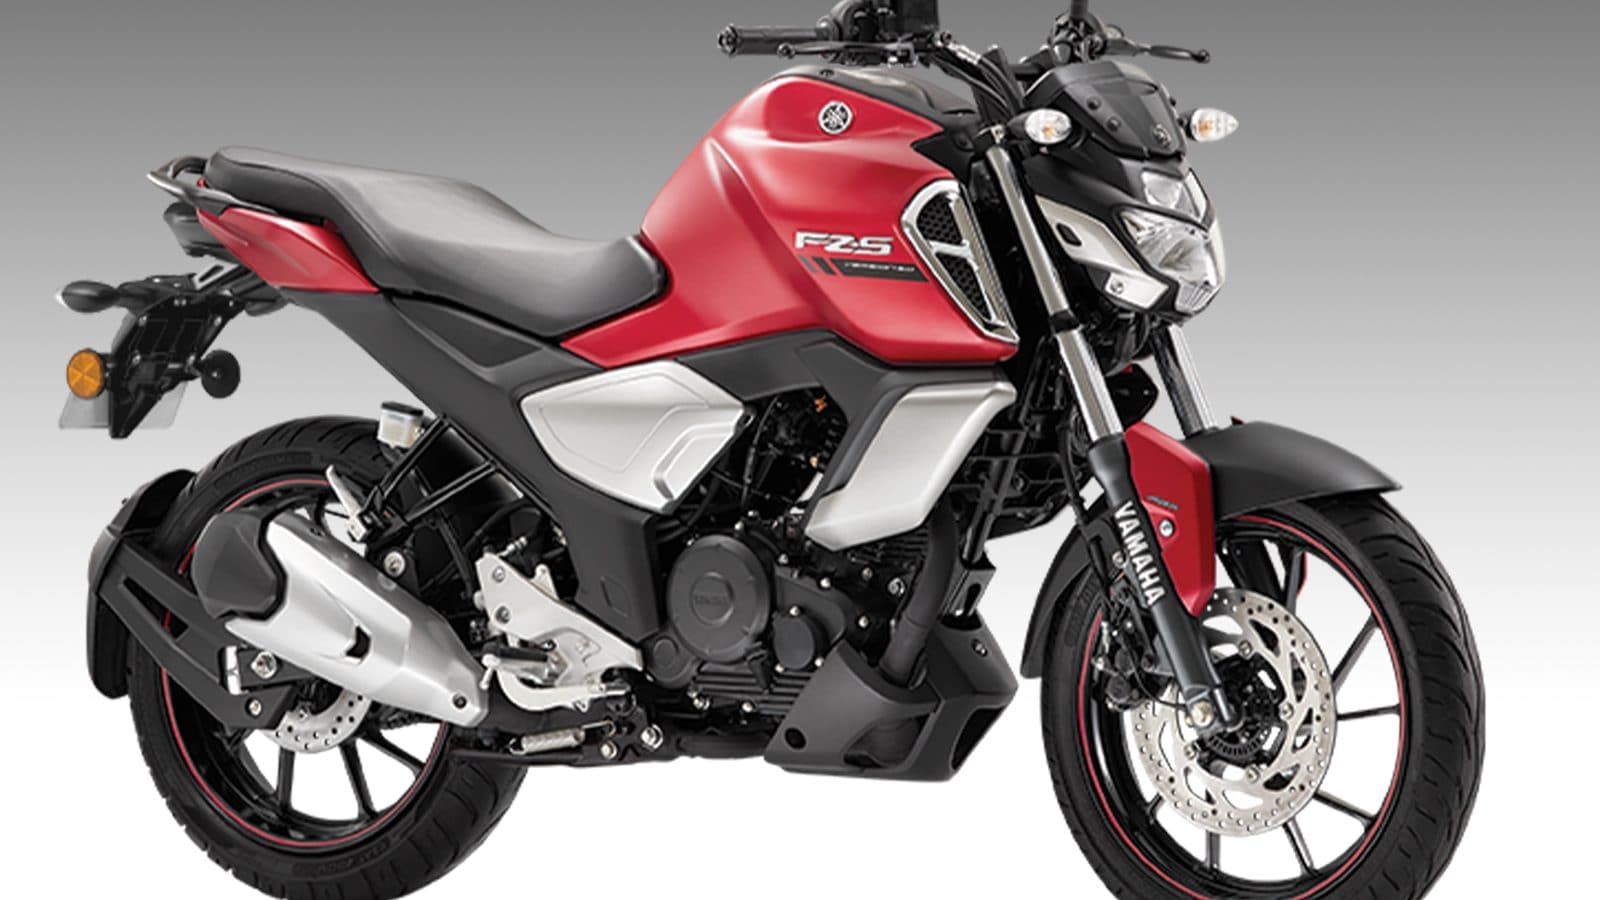 Yamaha FZ-S Fi 2022 Price, Mileage, Features, Colours and More